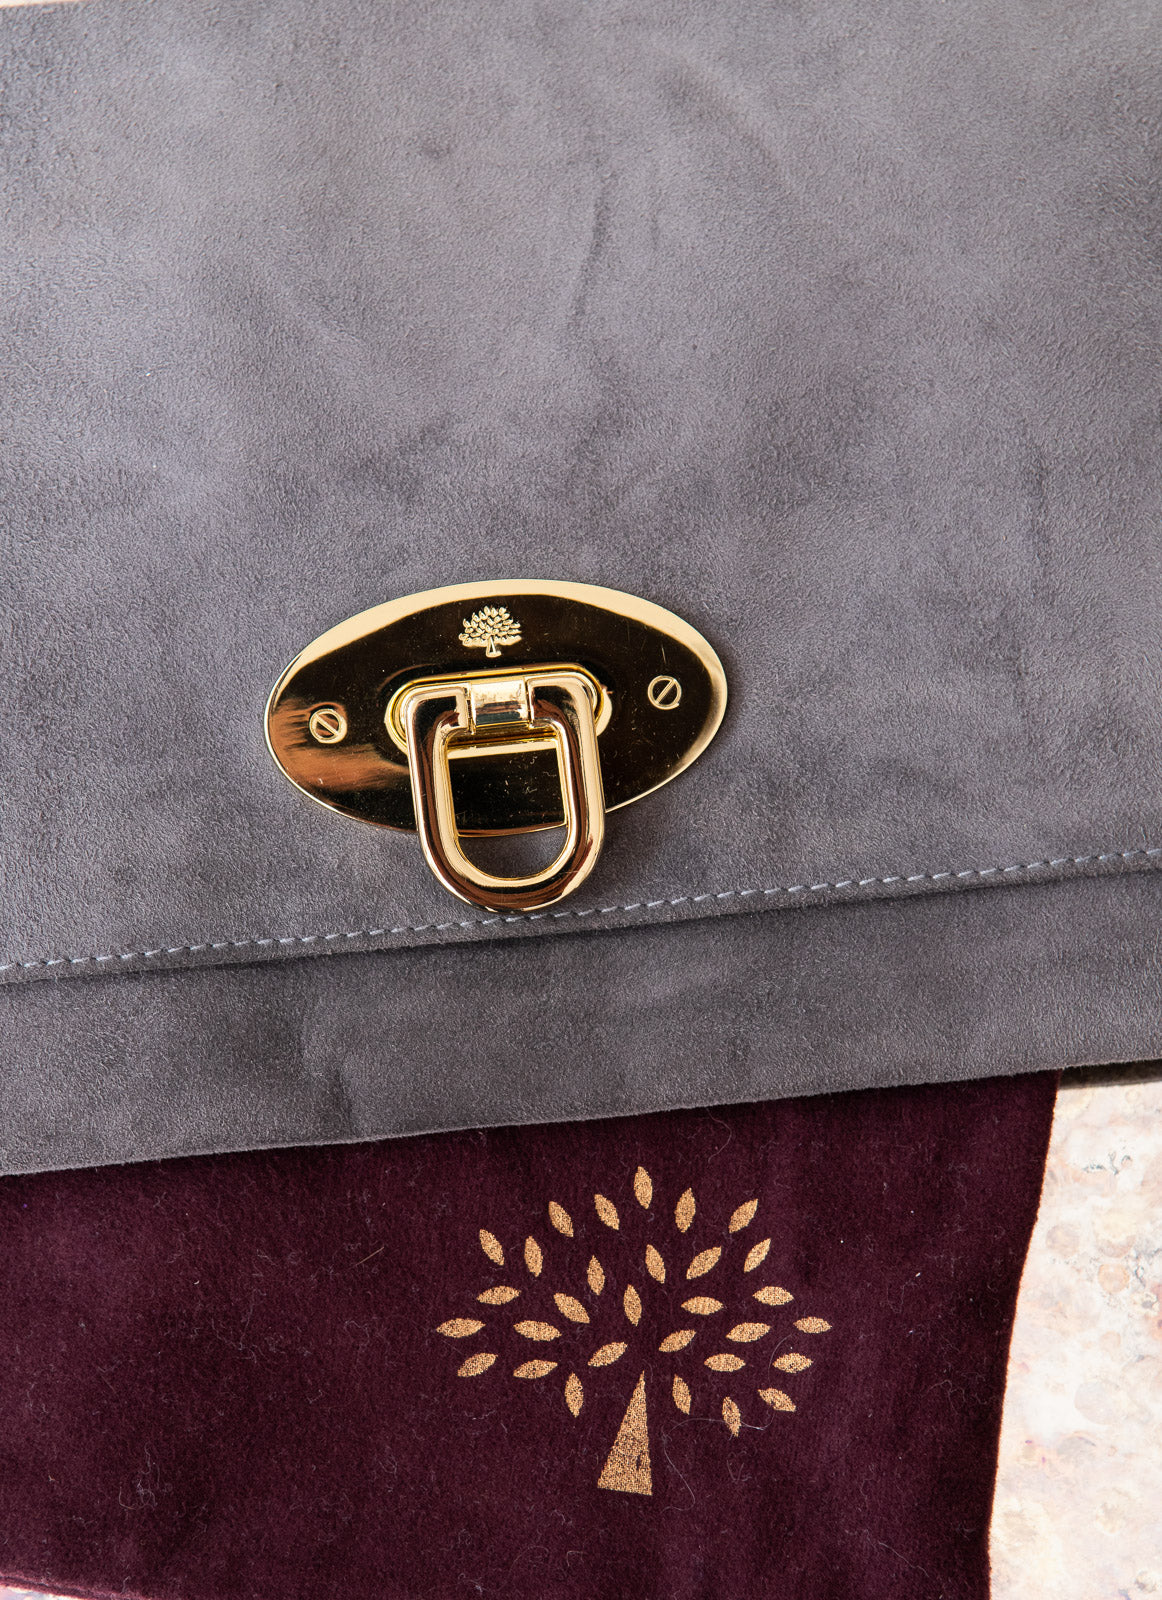 Mulberry Grey Suede Clutch Bag - Image 3 of 6